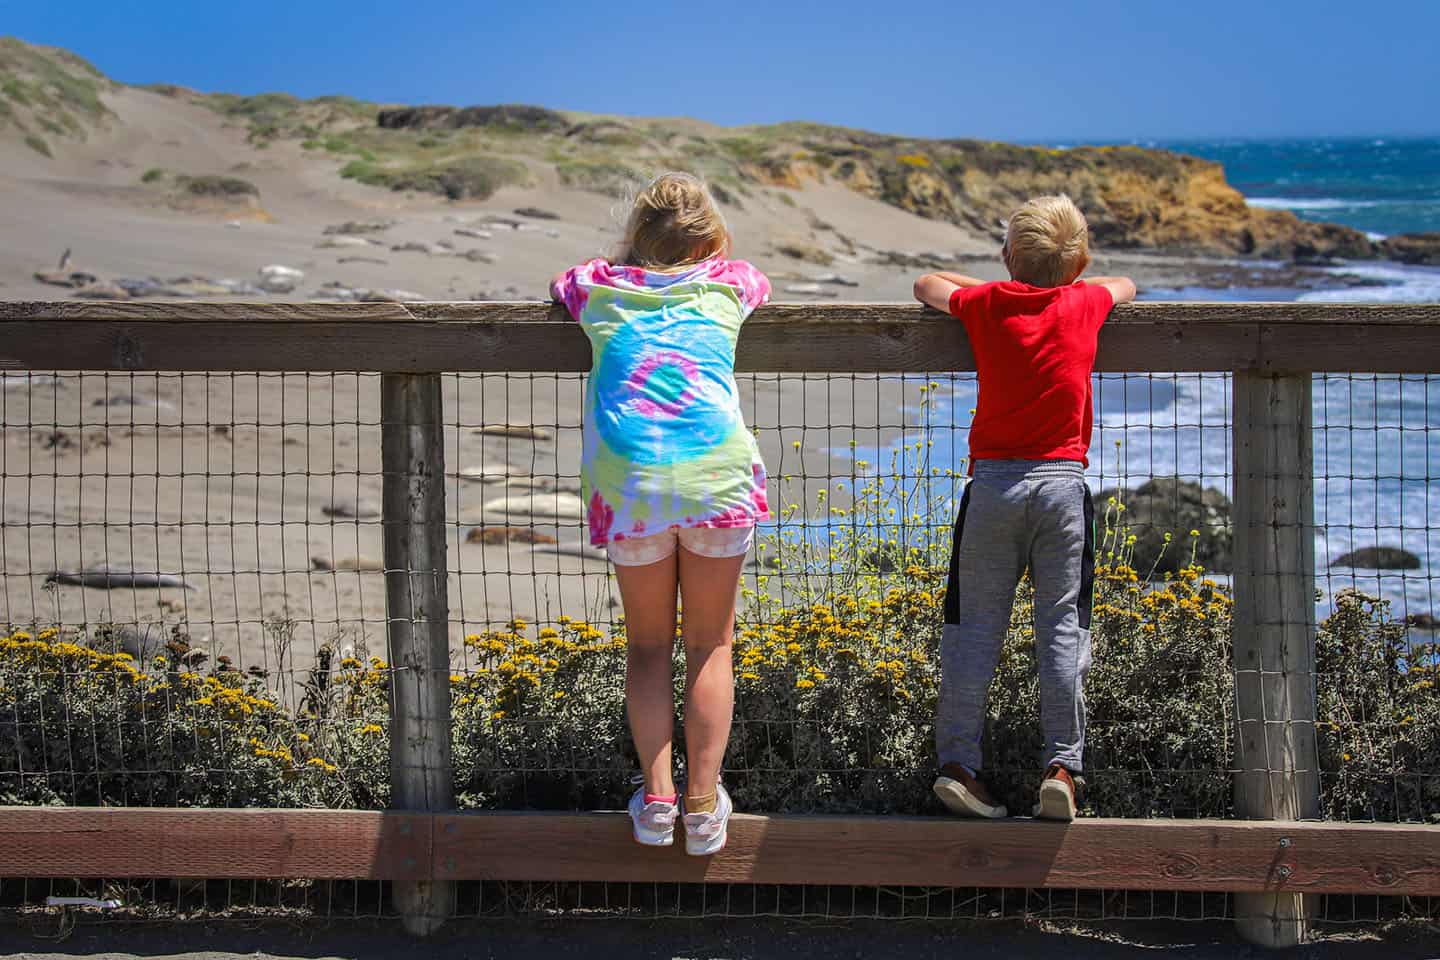 Viewing Elephant Seals